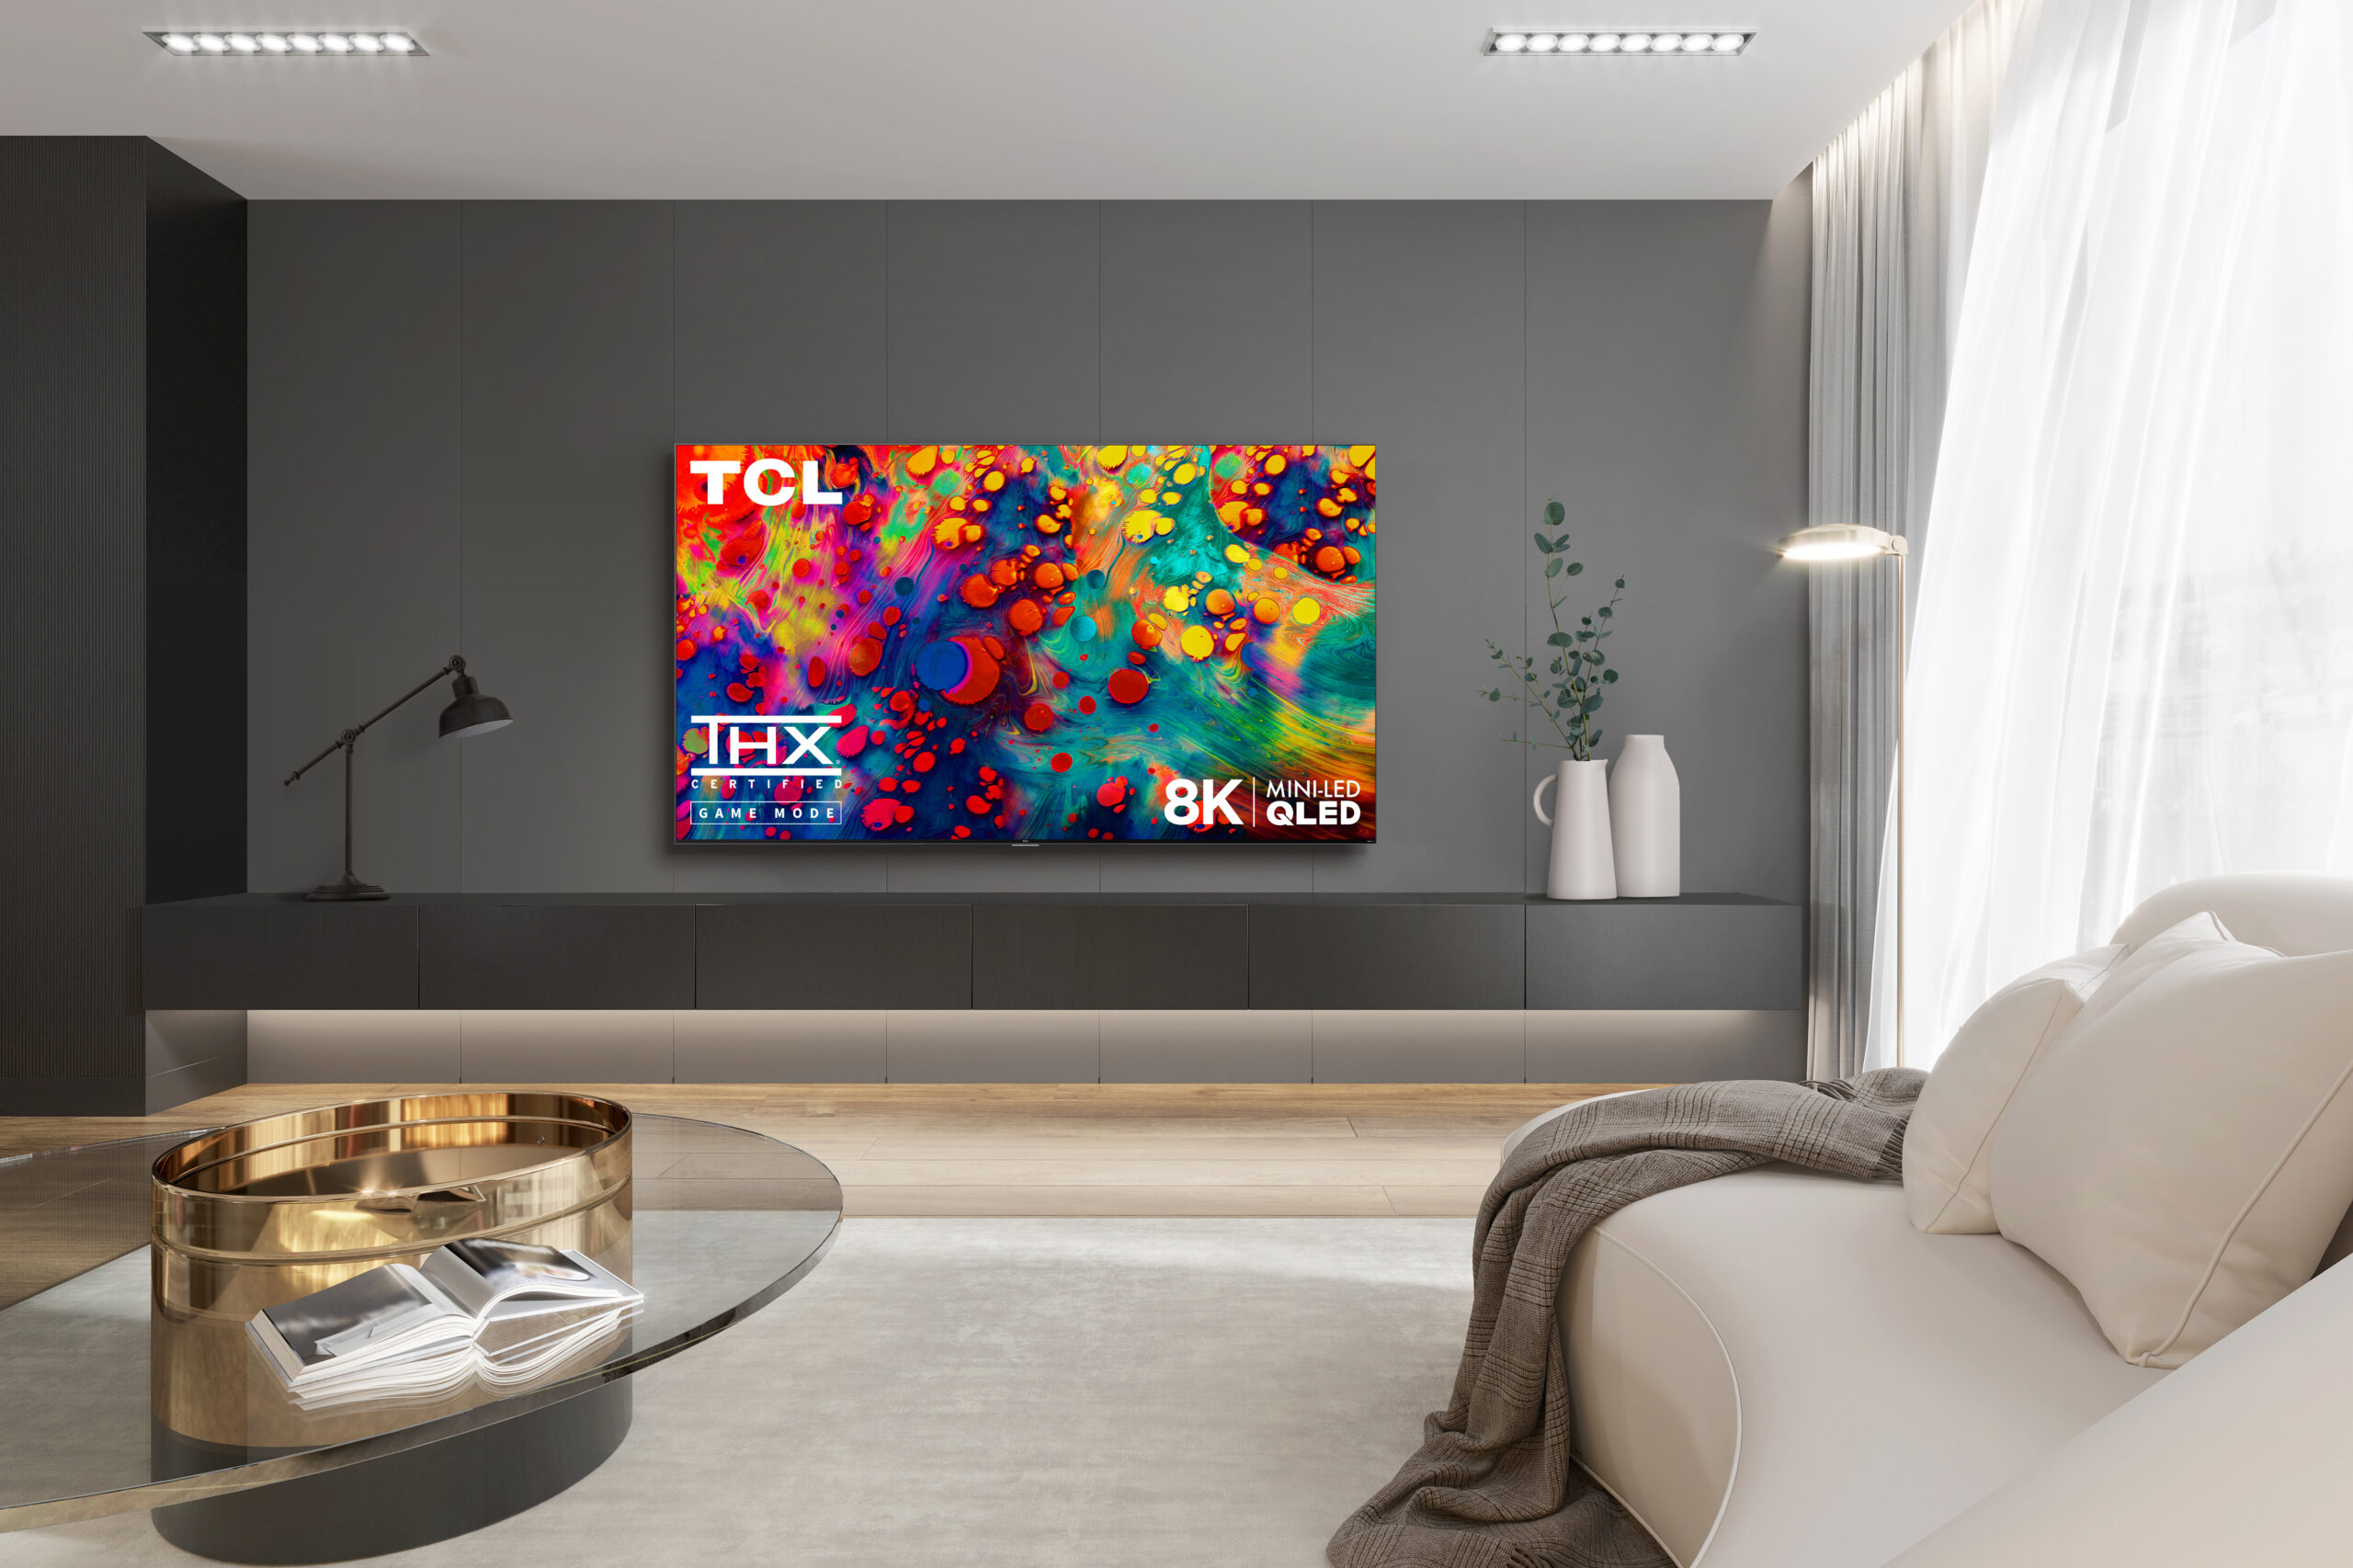 How to Optimize the TCL Gaming TV setup for Better Play?